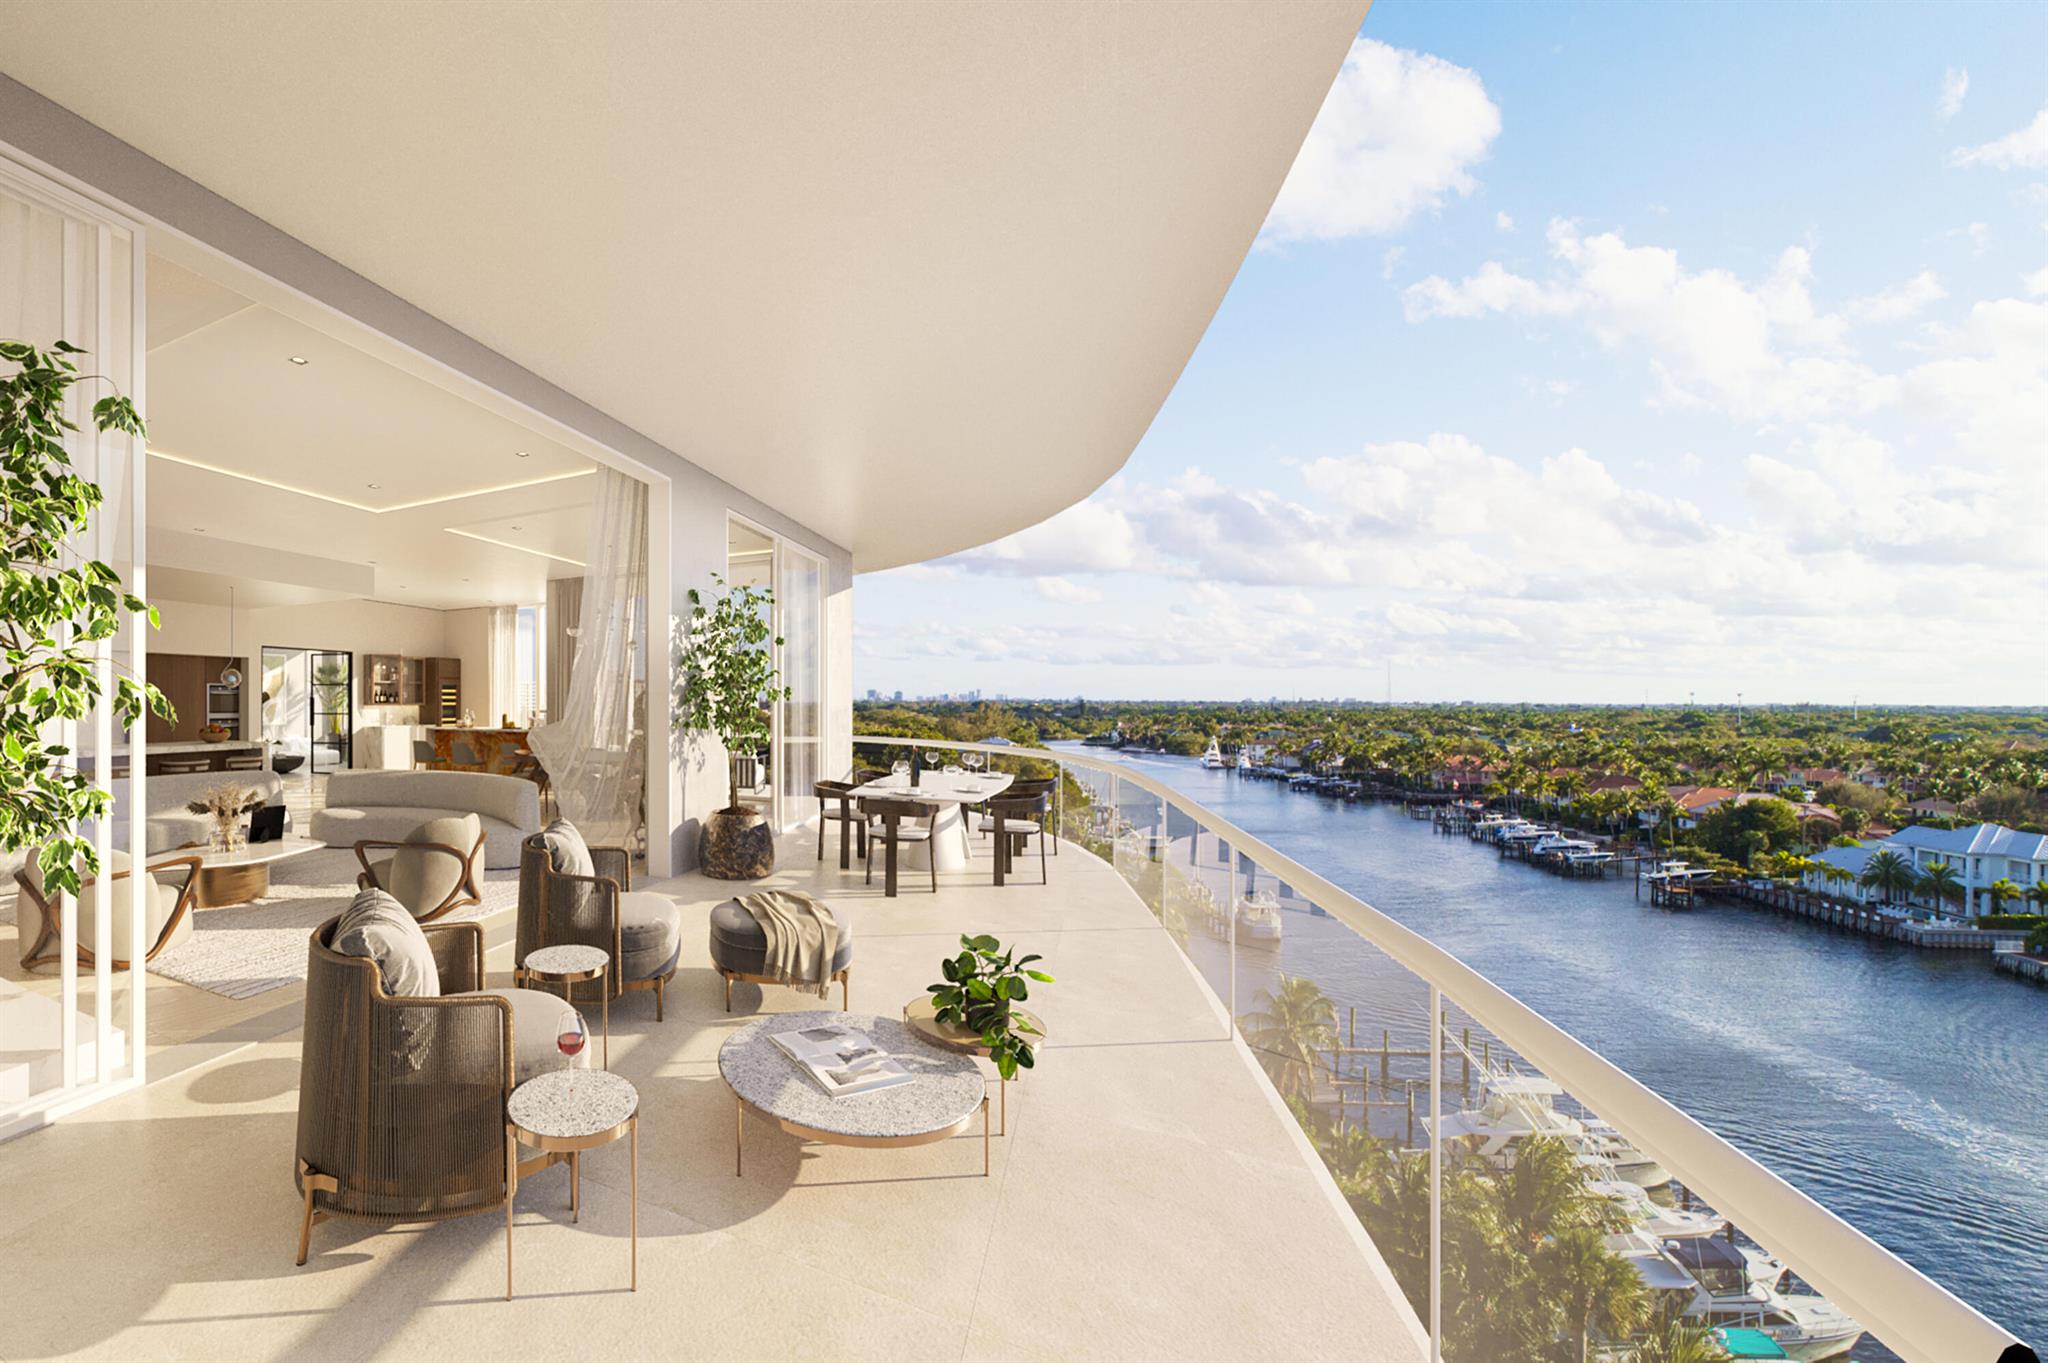 Discover appointed living at The Ritz-Carlton Residences-NOW UNDER CONSTRUCTION. Situated on 14+ acres on the Intracoastal Waterway, with only 106 residences & 29 private boat slips, this property is in the heart of Palm Beach Gardens' dining, shopping & marina district. This flow through, corner residence w/ floor-to-ceiling triple-paned windows capture water, marina & sunset views. This combination creates 9,000+/- sq ft of living space & offers you the unique opportunity to personalize the layout to your desires. 4 parking spaces included. High-end finishes. 24-hr concierge, security & valet. Countless amenities incl. fitness center, pickleball, guest suites, cabanas, resort-style pool w/ lap lane & more. Occupancy Q1 2026+/-. Now is the time to seize this limited opportunity.